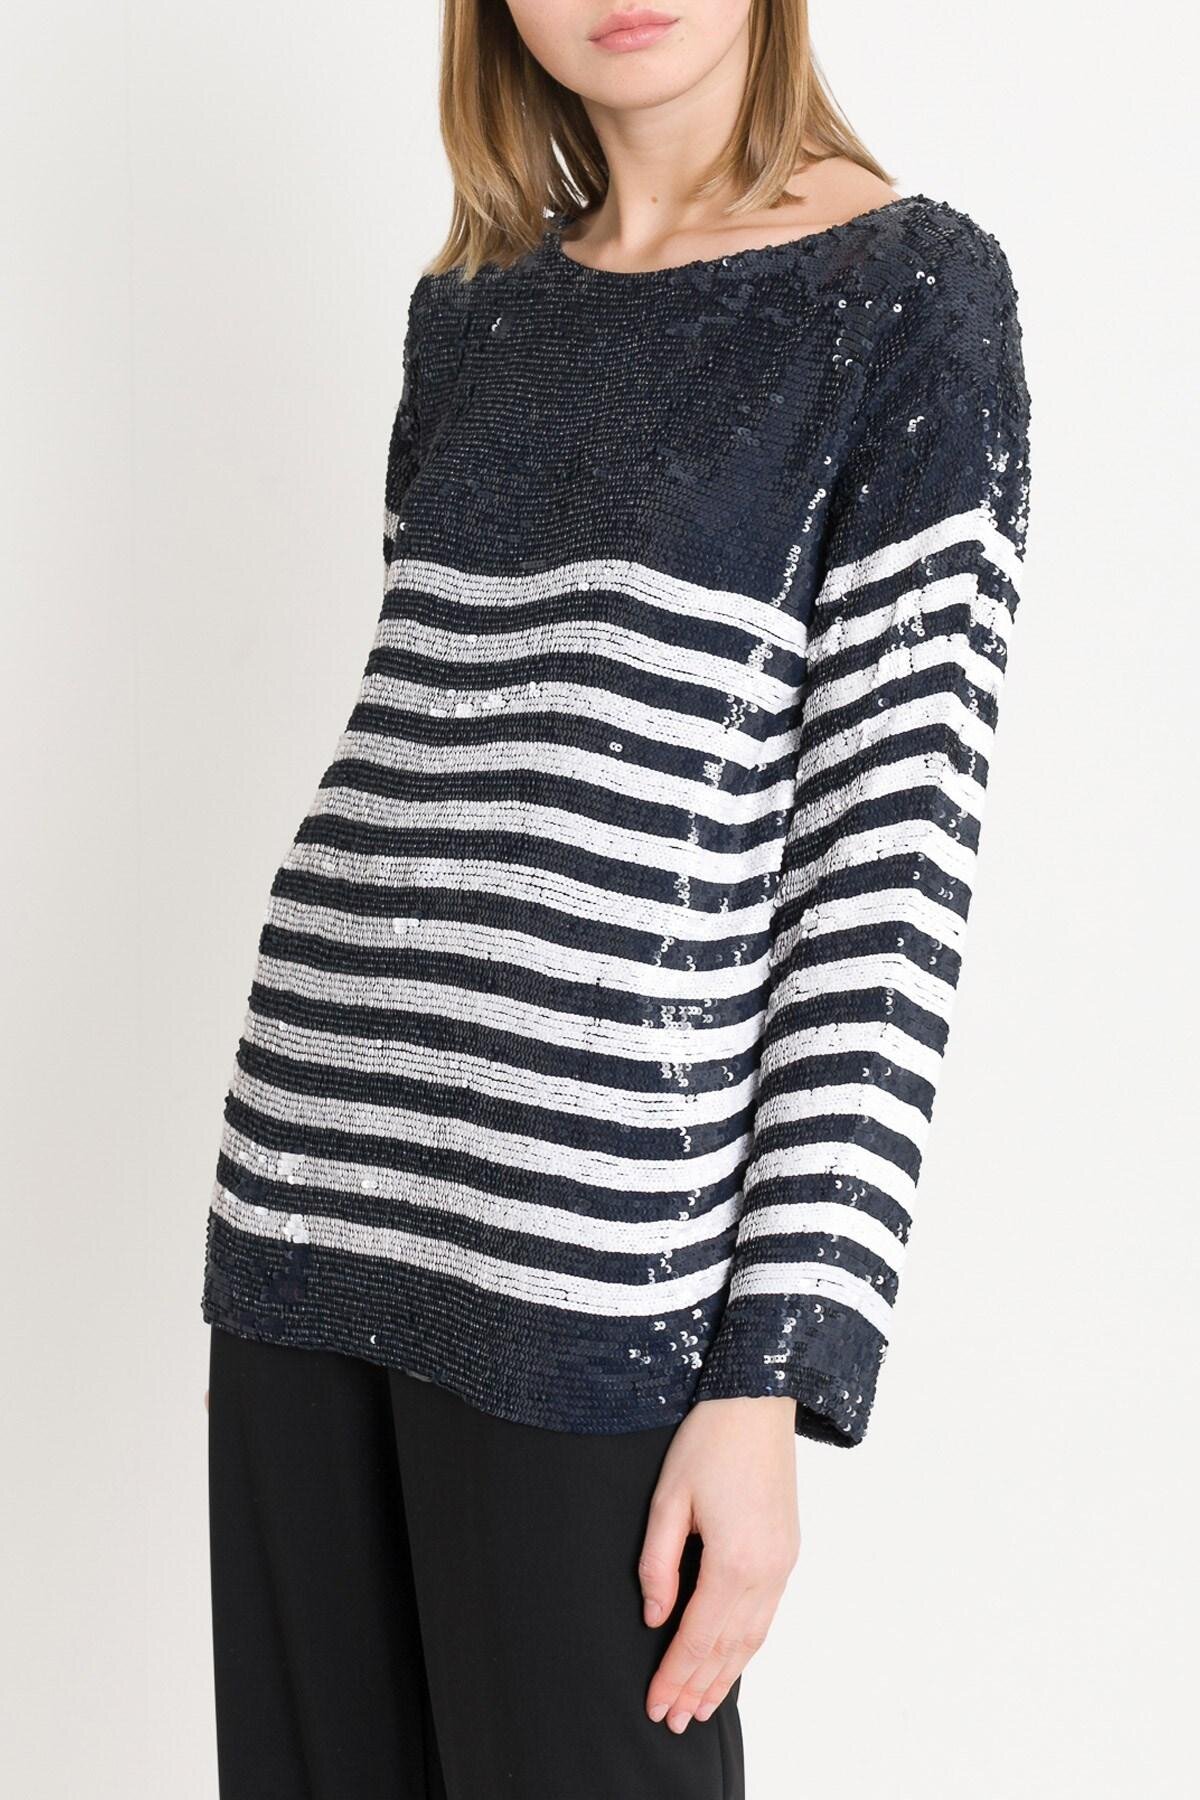 parosh--Sequined-Blouse-With-Striped-Mnotif.jpeg